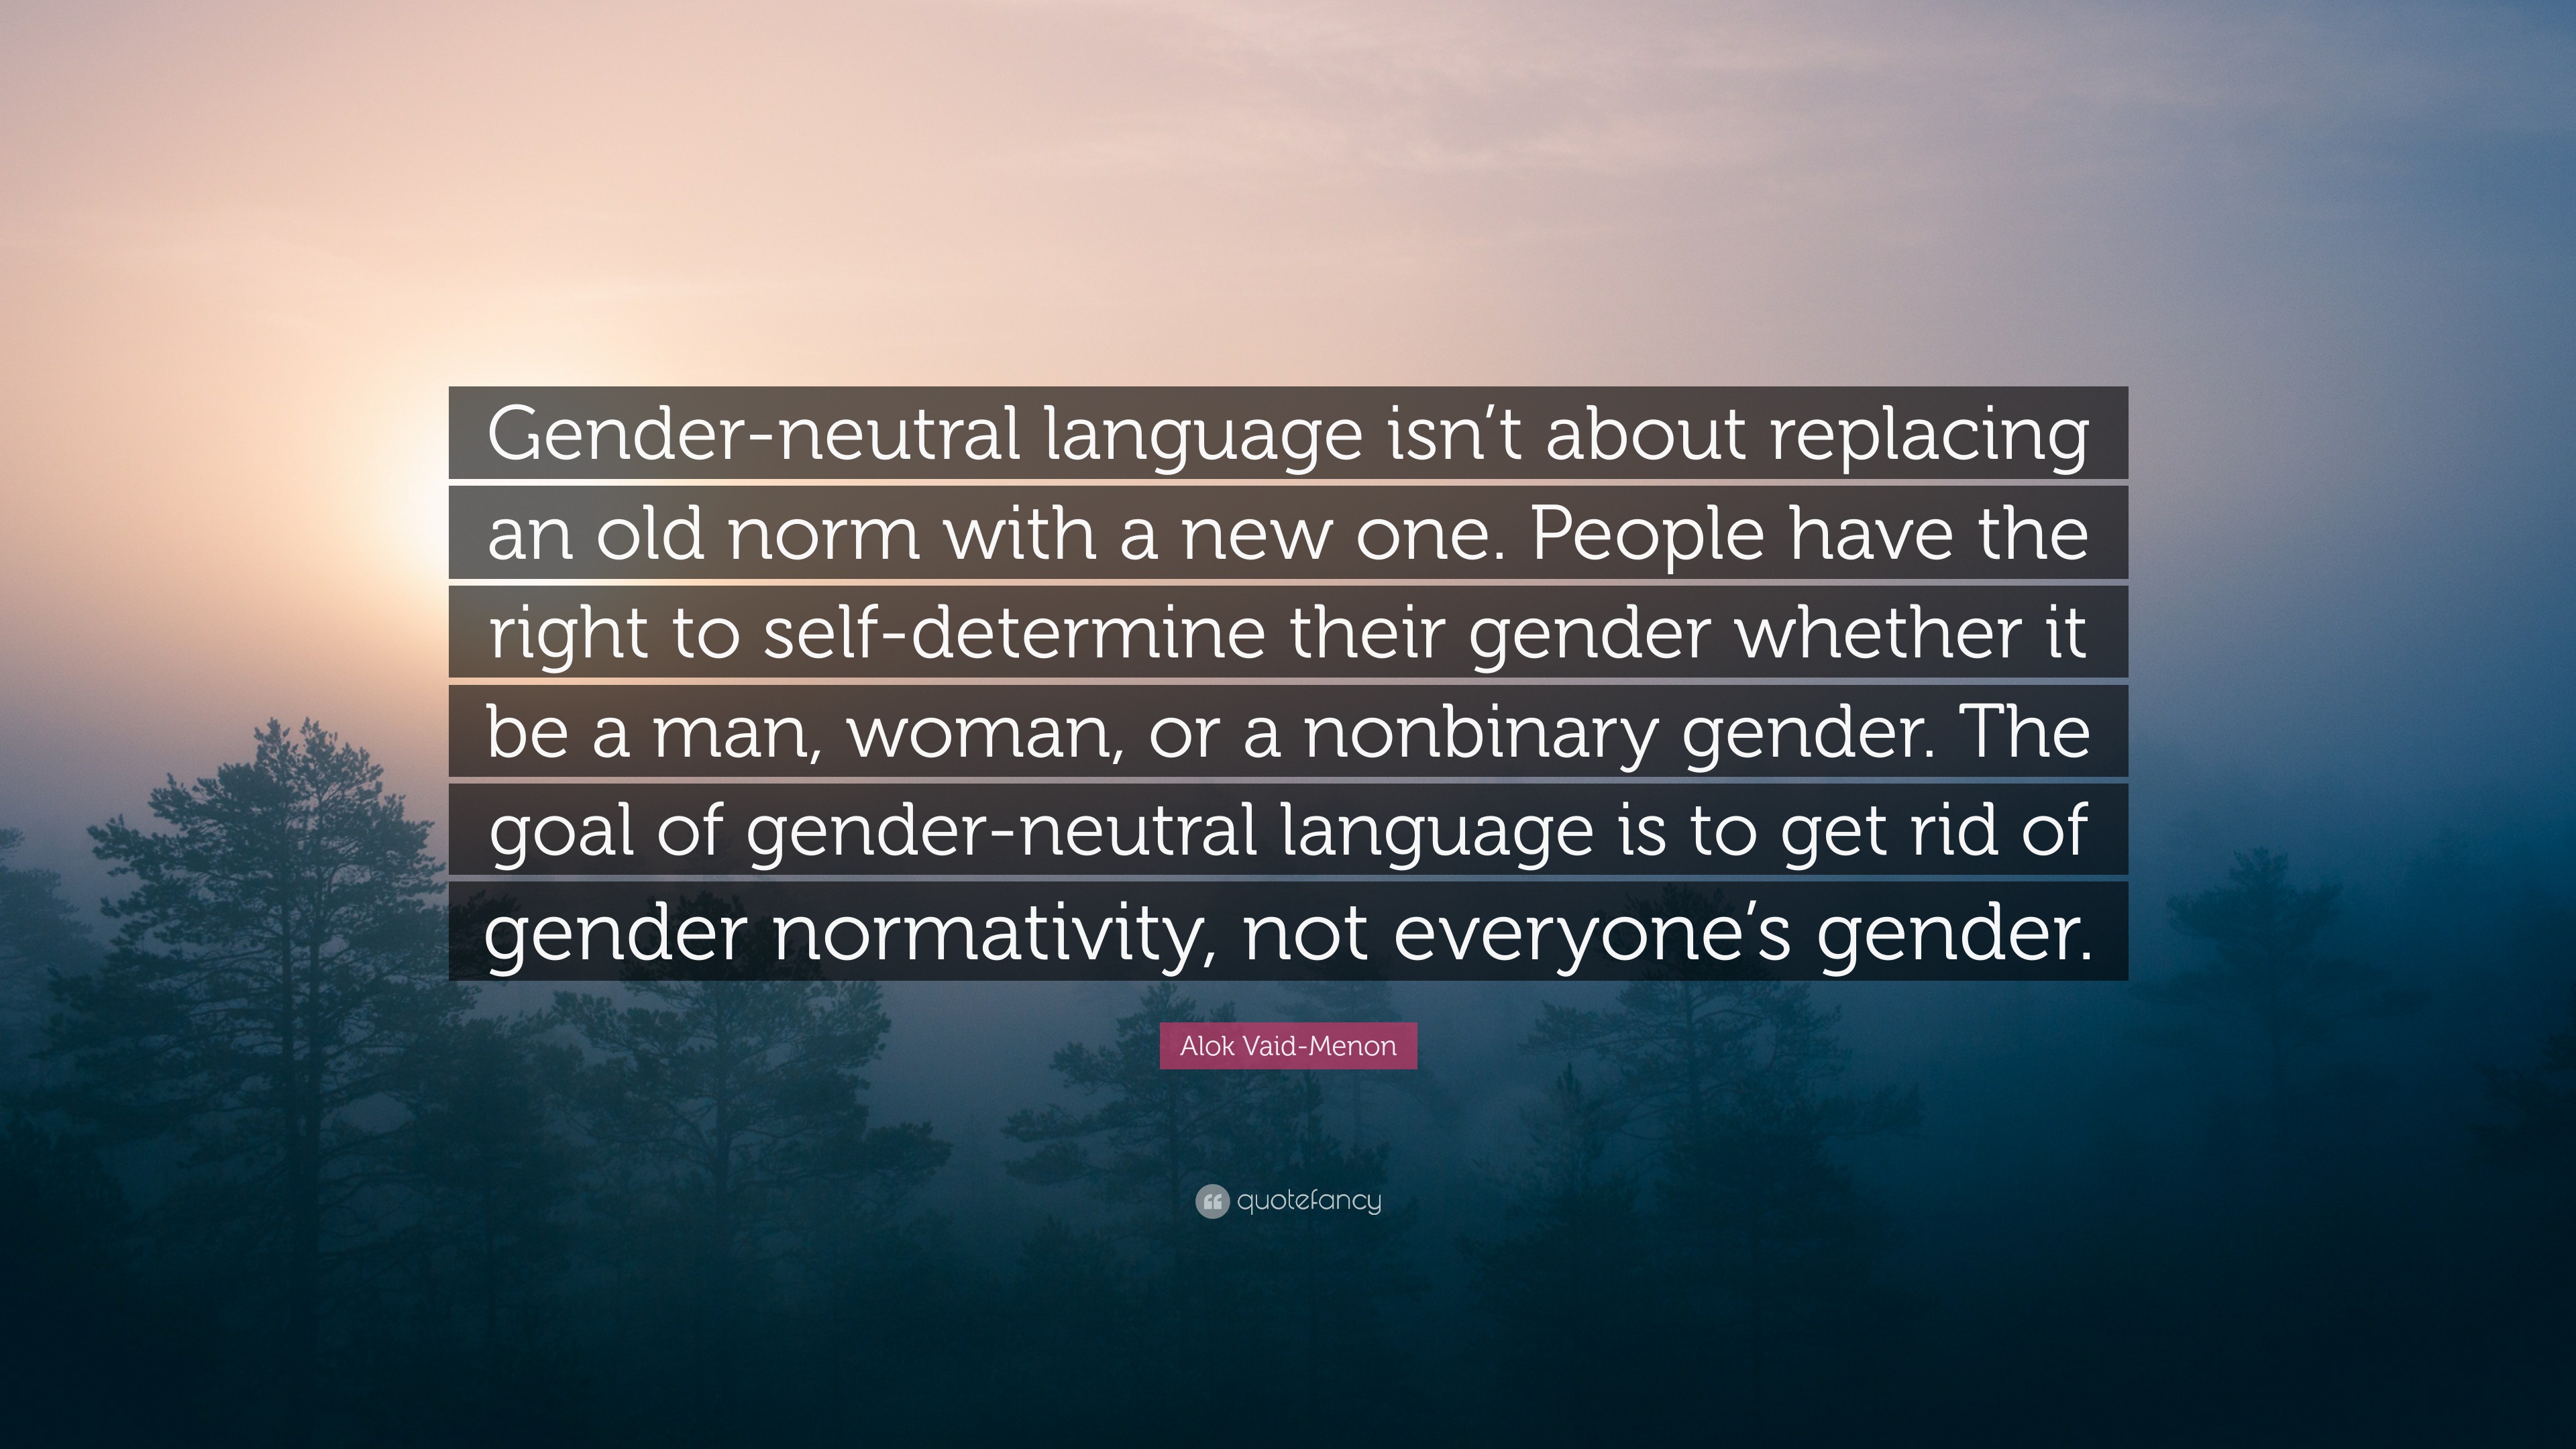 Alok Vaid Menon Quote “gender Neutral Language Isnt About Replacing